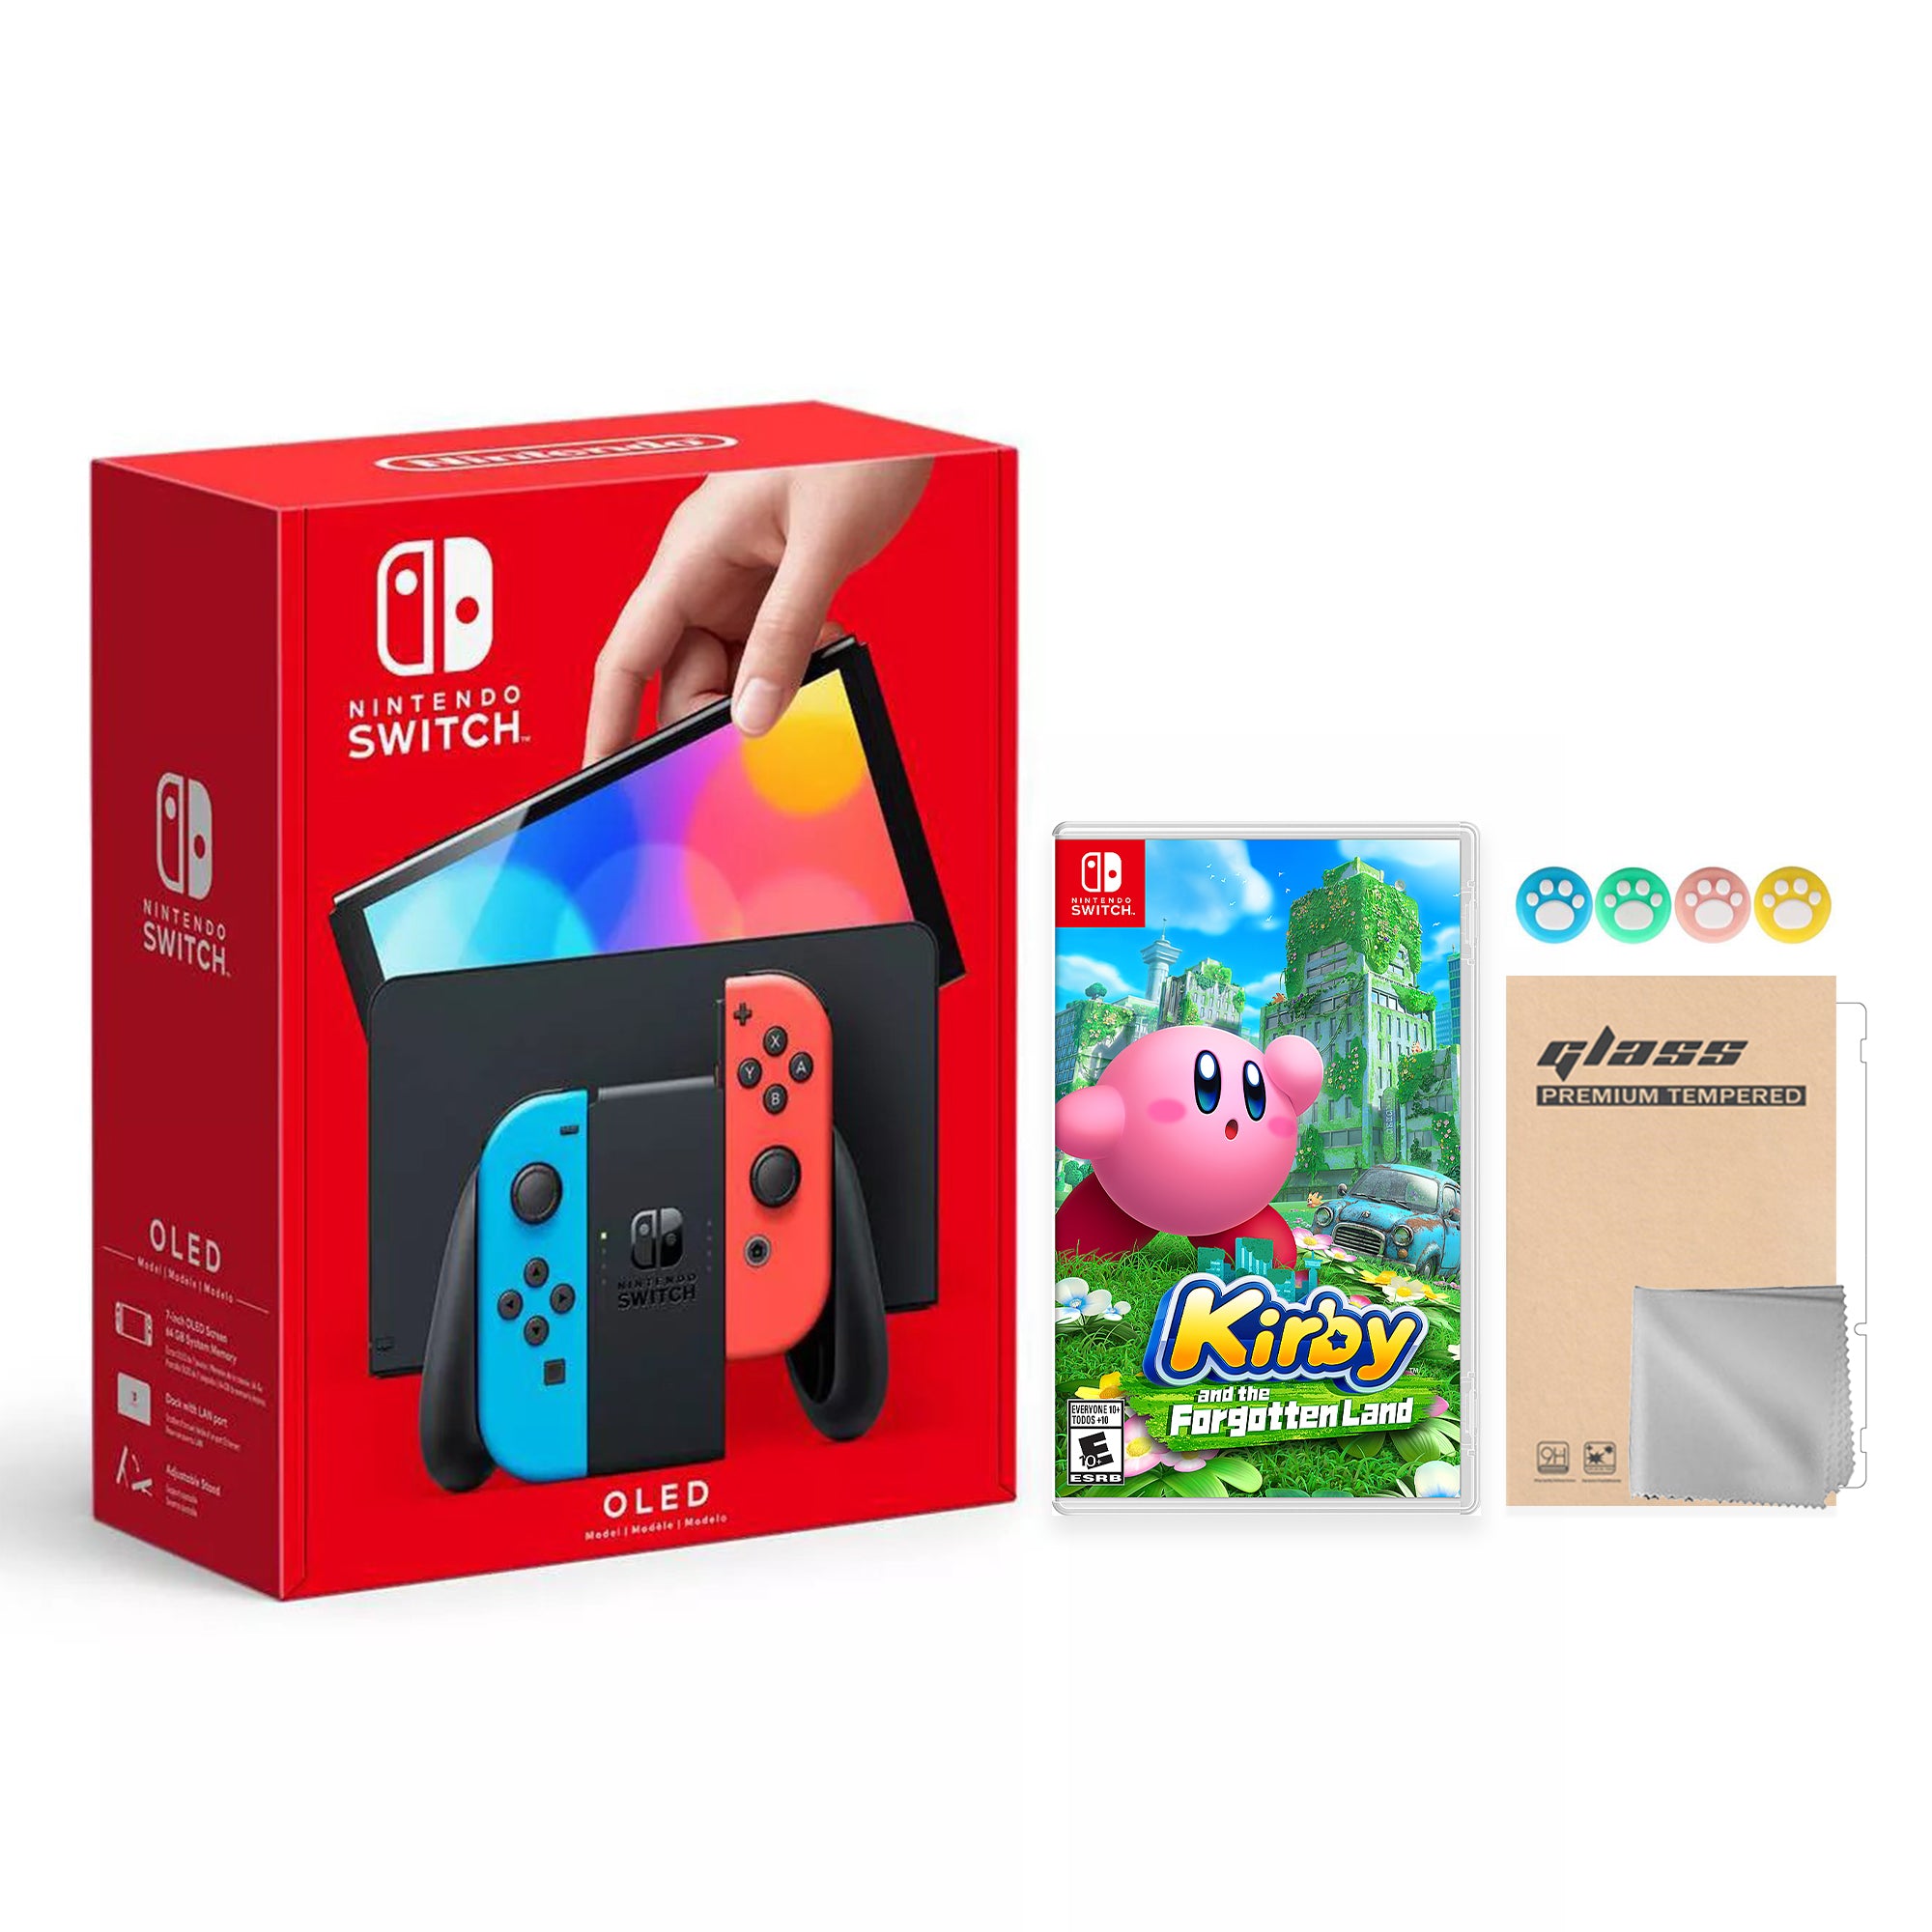 2022 New Nintendo Switch OLED Model Neon Red Blue Joy Con 64GB Console Improved HD Screen & LAN-Port Dock with Kirby and the Forgotten Land, Mytrix Joystick Caps & Screen Protector